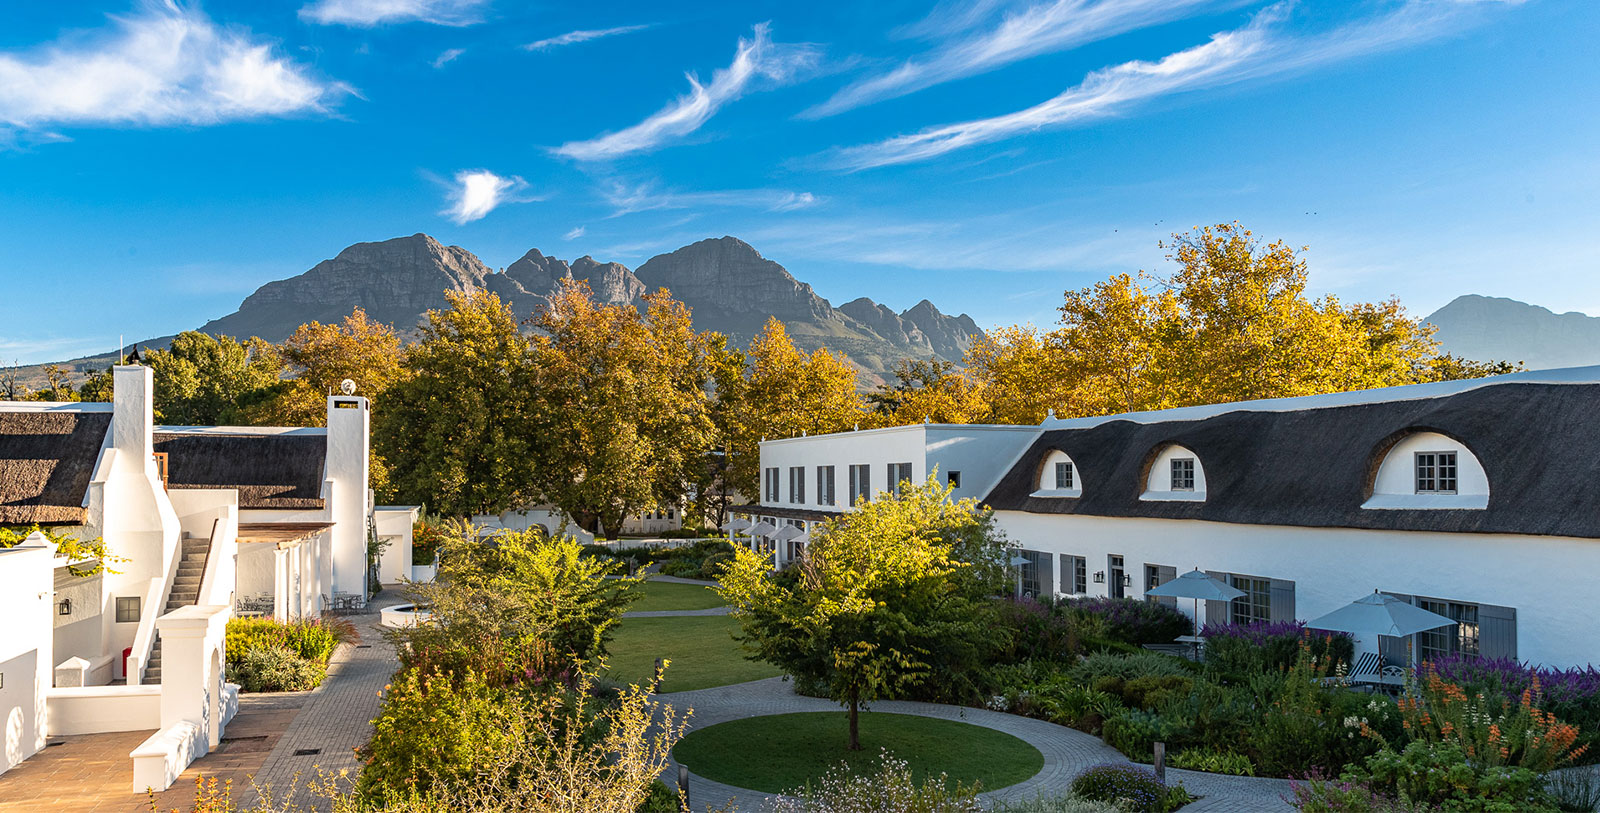 Image of Erinvale Estate Hotel & Spa, 1666, a member of Historic Hotels Worldwide since 2018, located in Somerset, South Africa